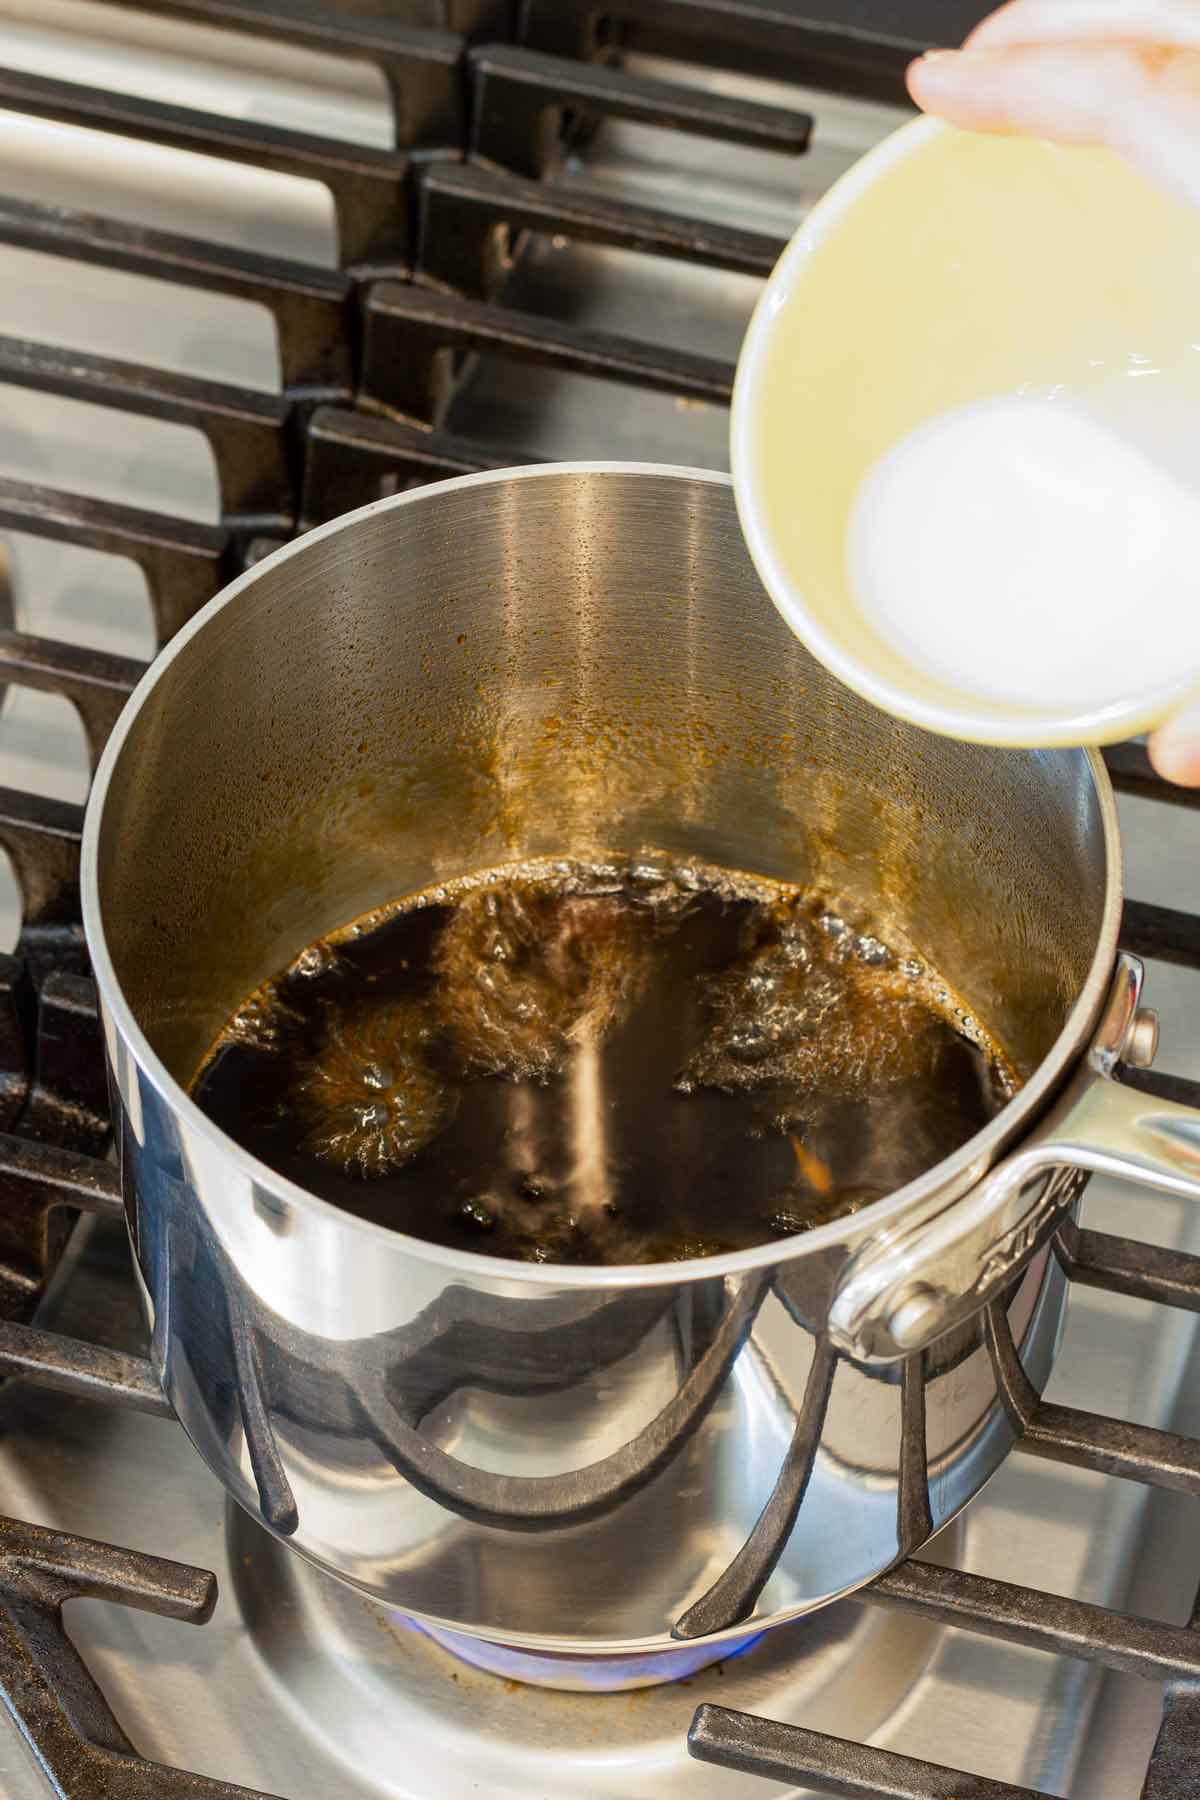 cornstarch slurry being poured into simmering sauce